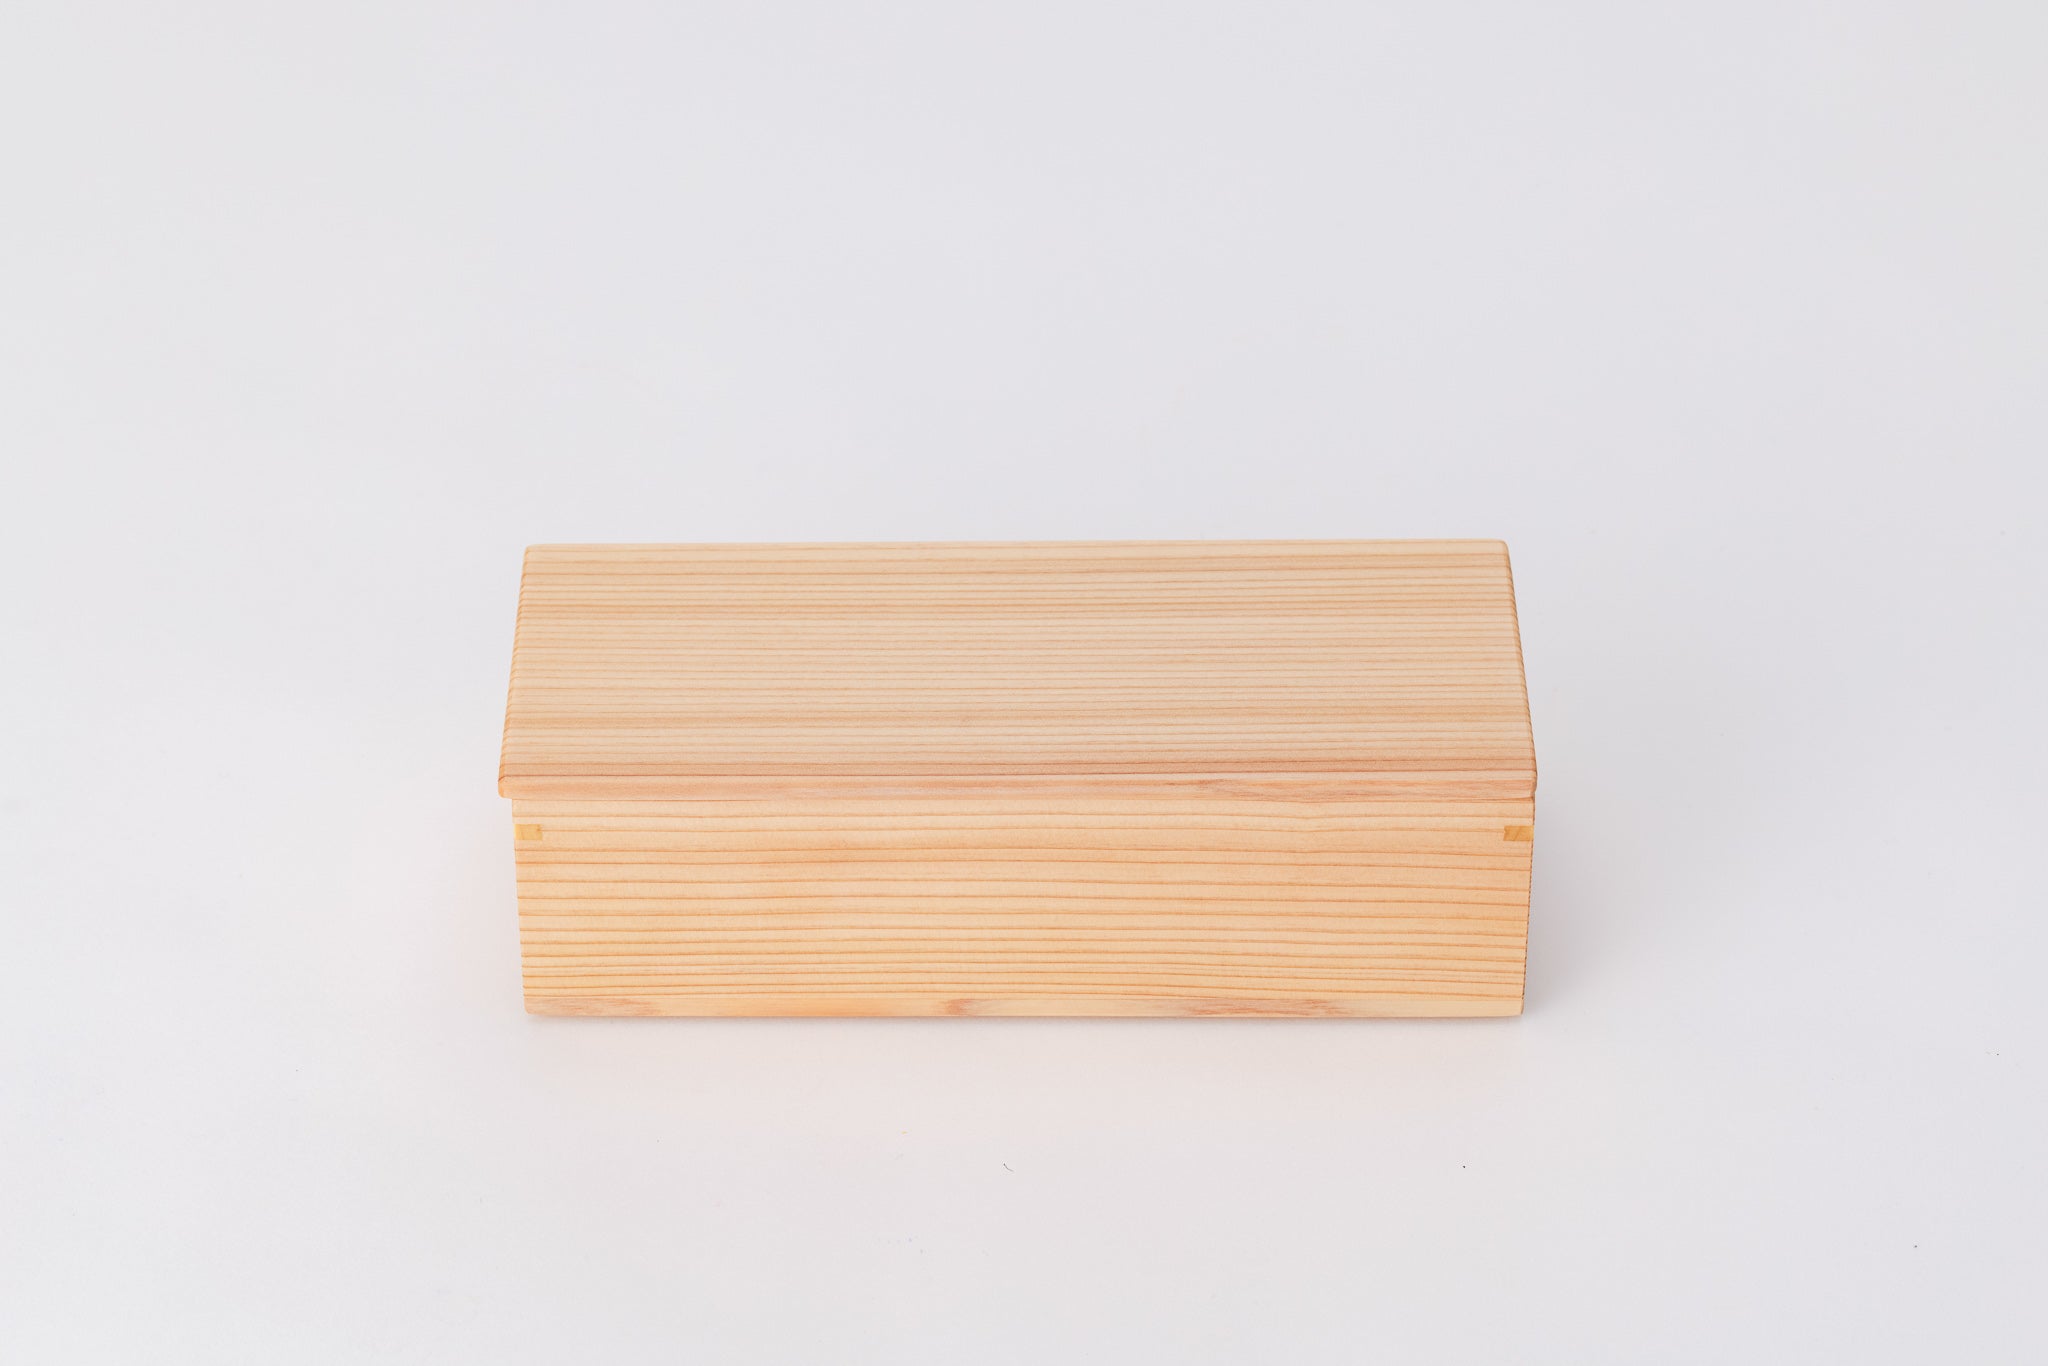 A rectangular box made of light-colored cedar sits on a white background with its lid closed. The long edge of the box faces the viewer.